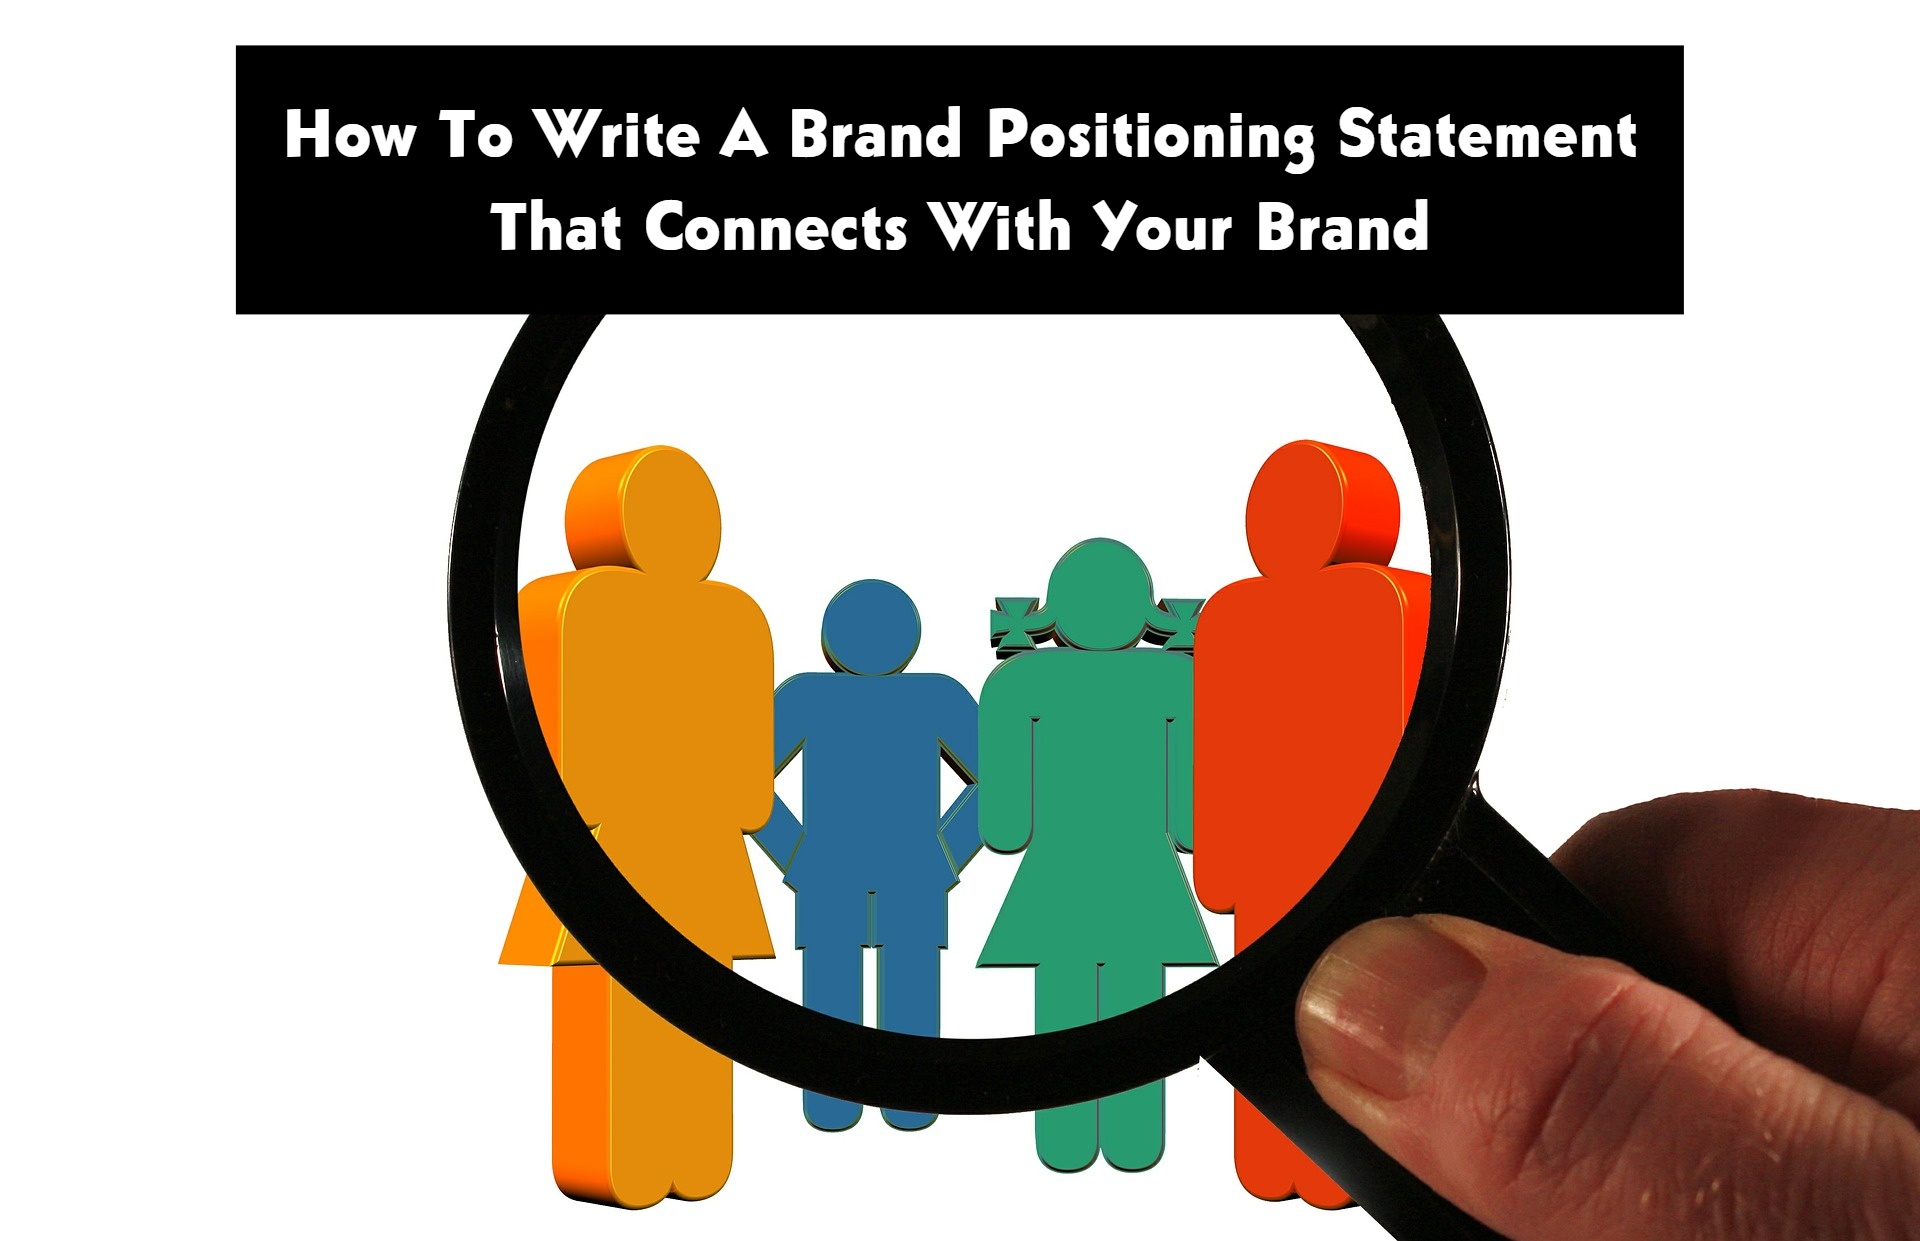 How To Write A Brand Positioning Statement That Connects With Your Brand